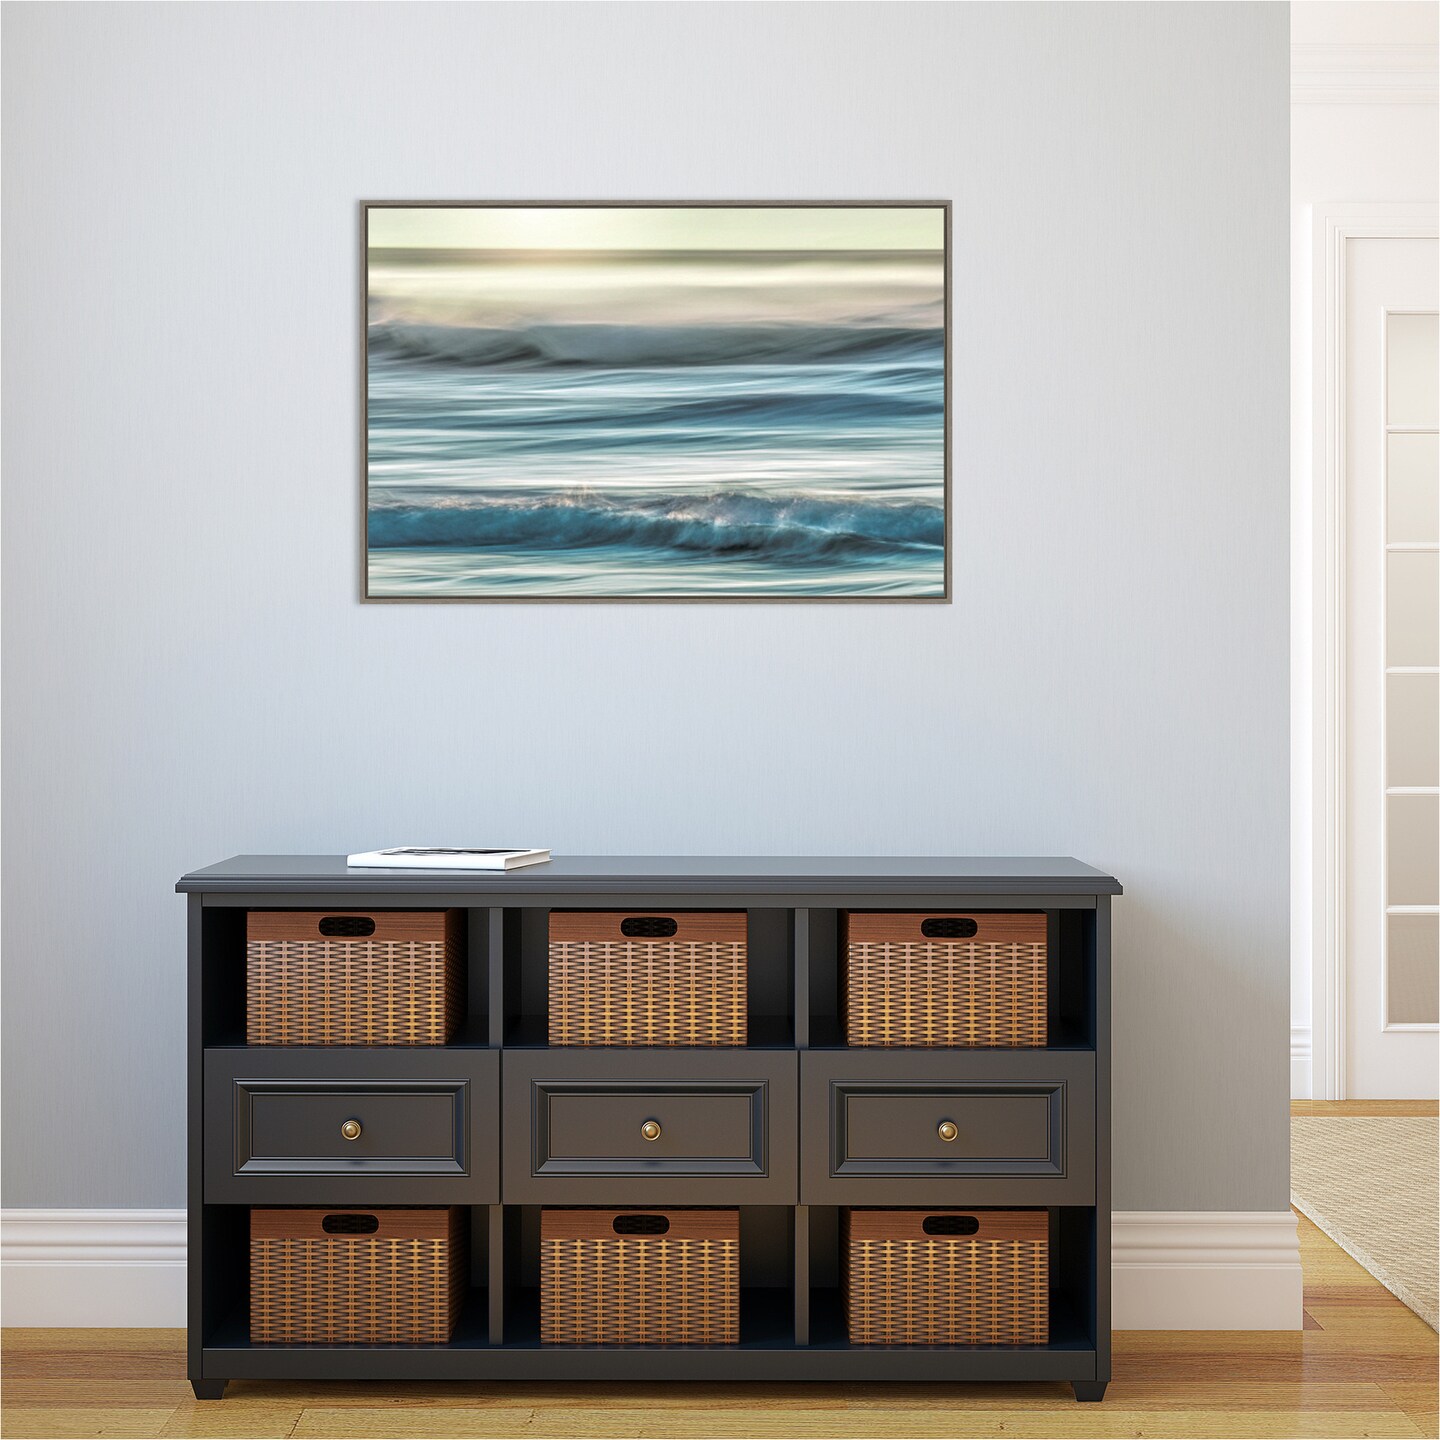 Motion blur of sunset on coast by Don Paulson Danita Delimont 33-in. W x 23-in. H. Canvas Wall Art Print Framed in Grey